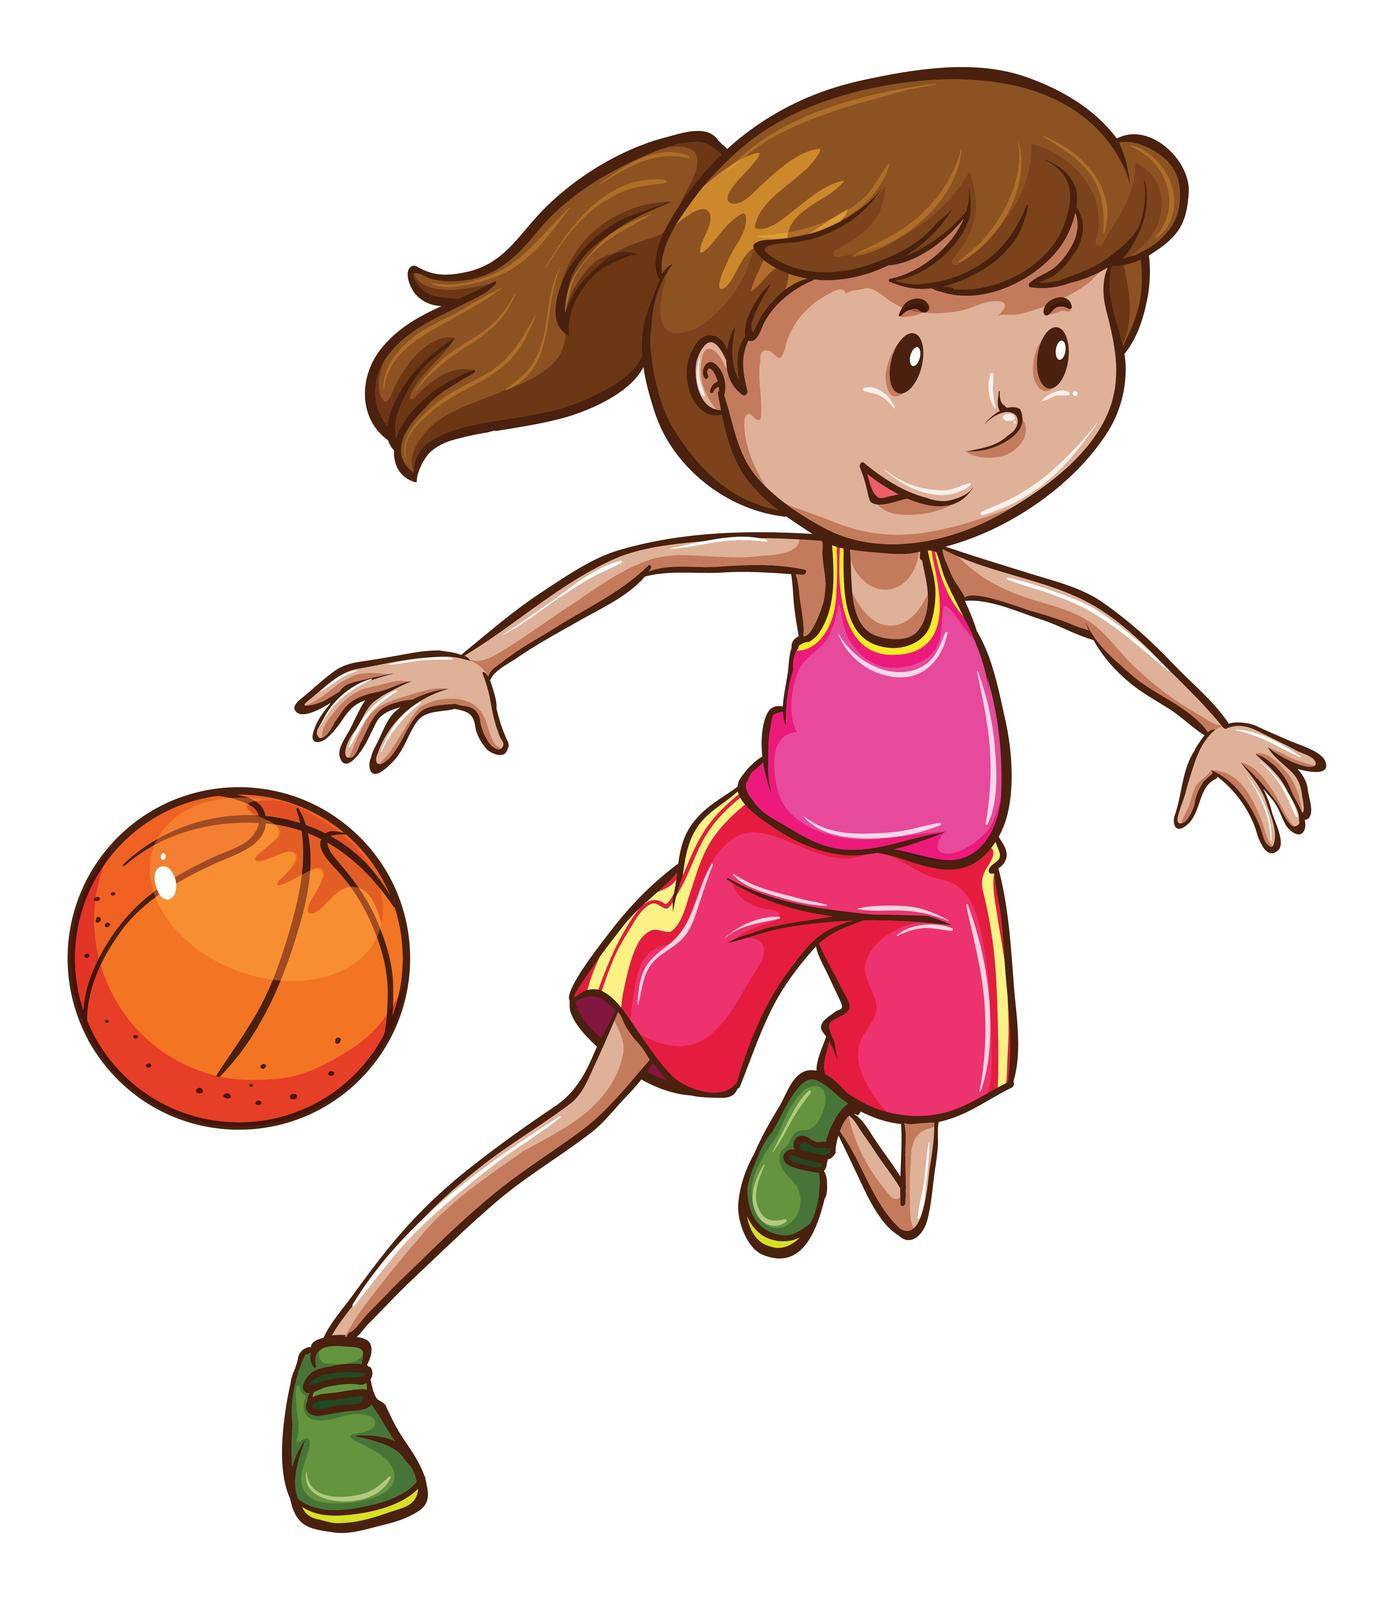 A simple coloured sketch of a girl playing basketball by iimages